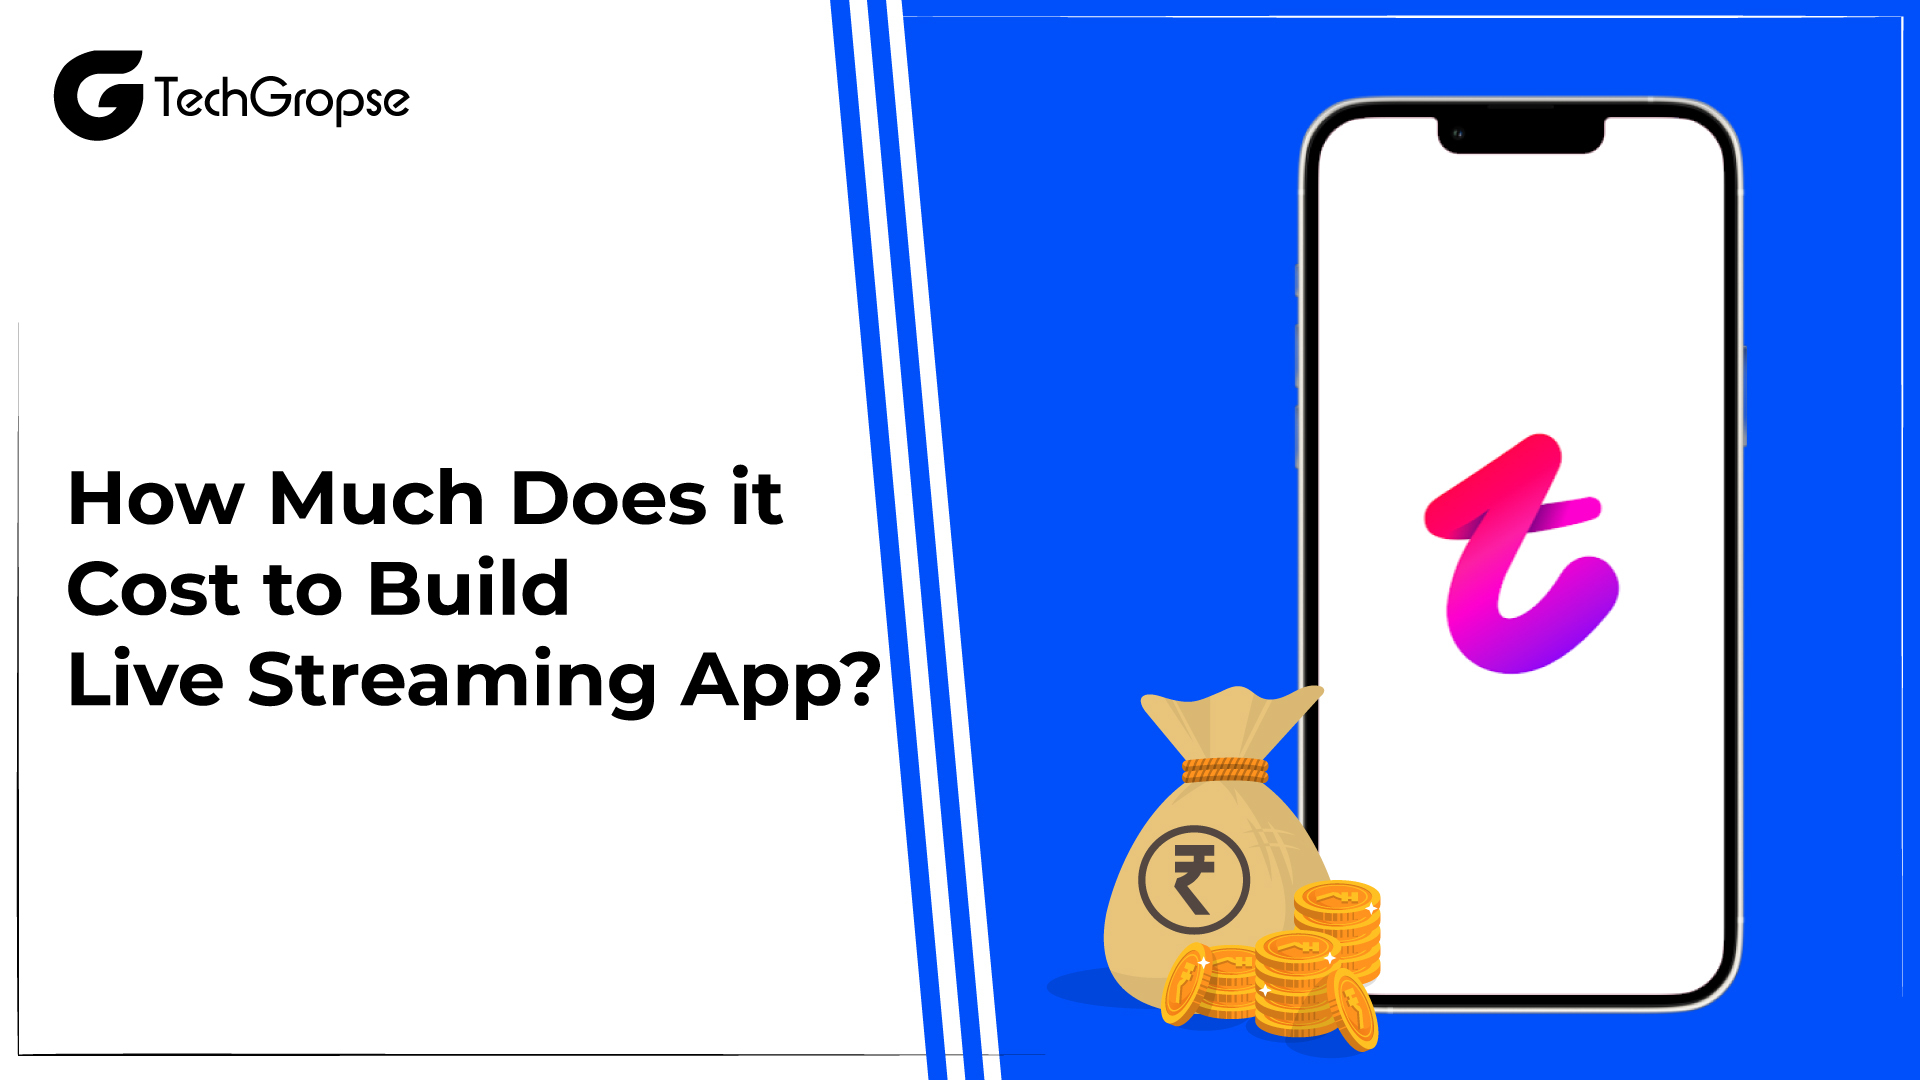 How Much Does it Cost to Build a Live Streaming App?